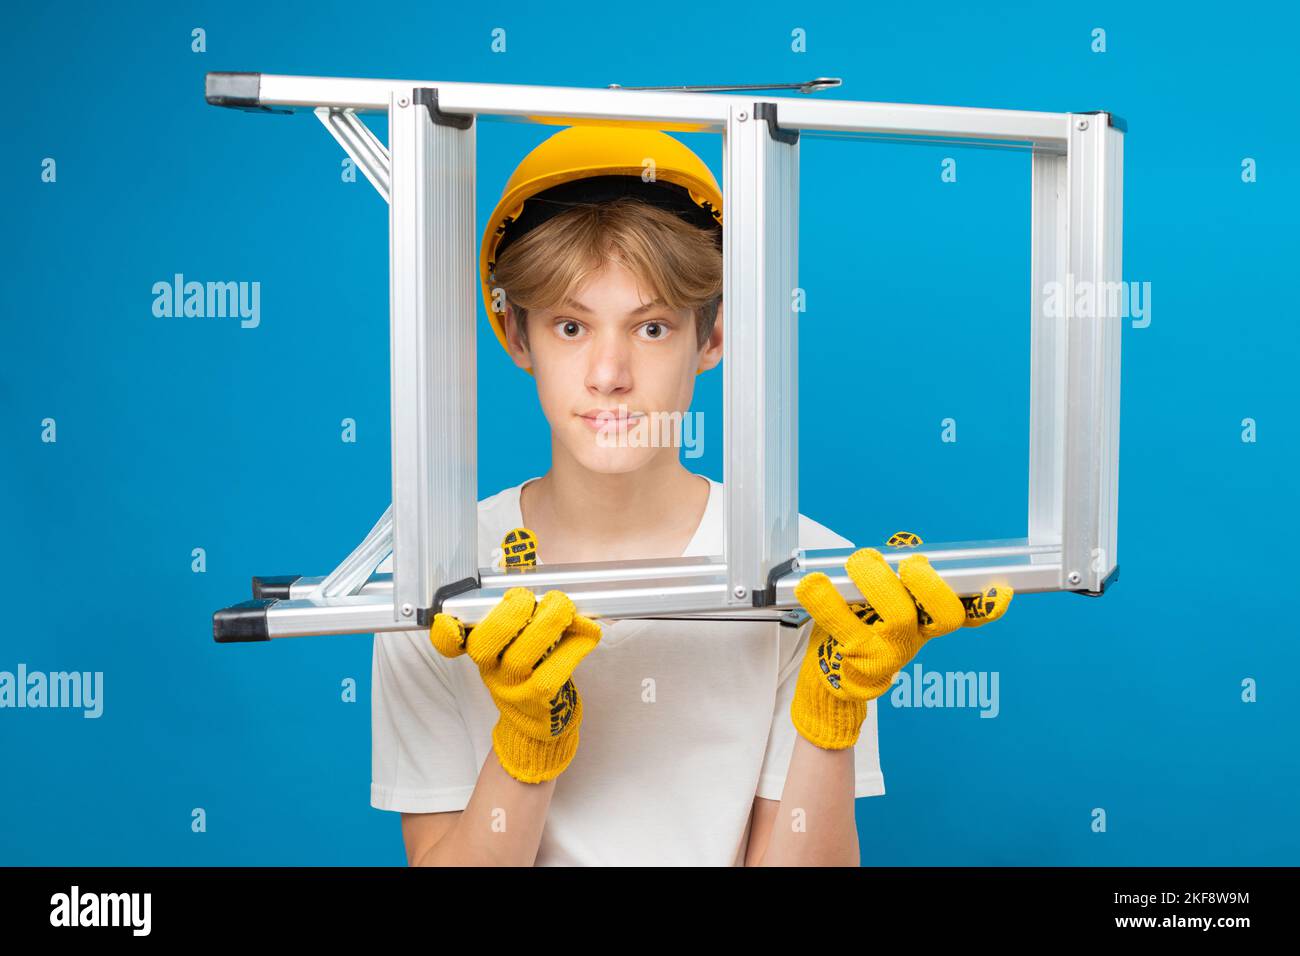 Young repairman teen in white t-shirt and gloves with yellow helmet in head, holding ladder in hands standing in studio on blue background. Stock Photo